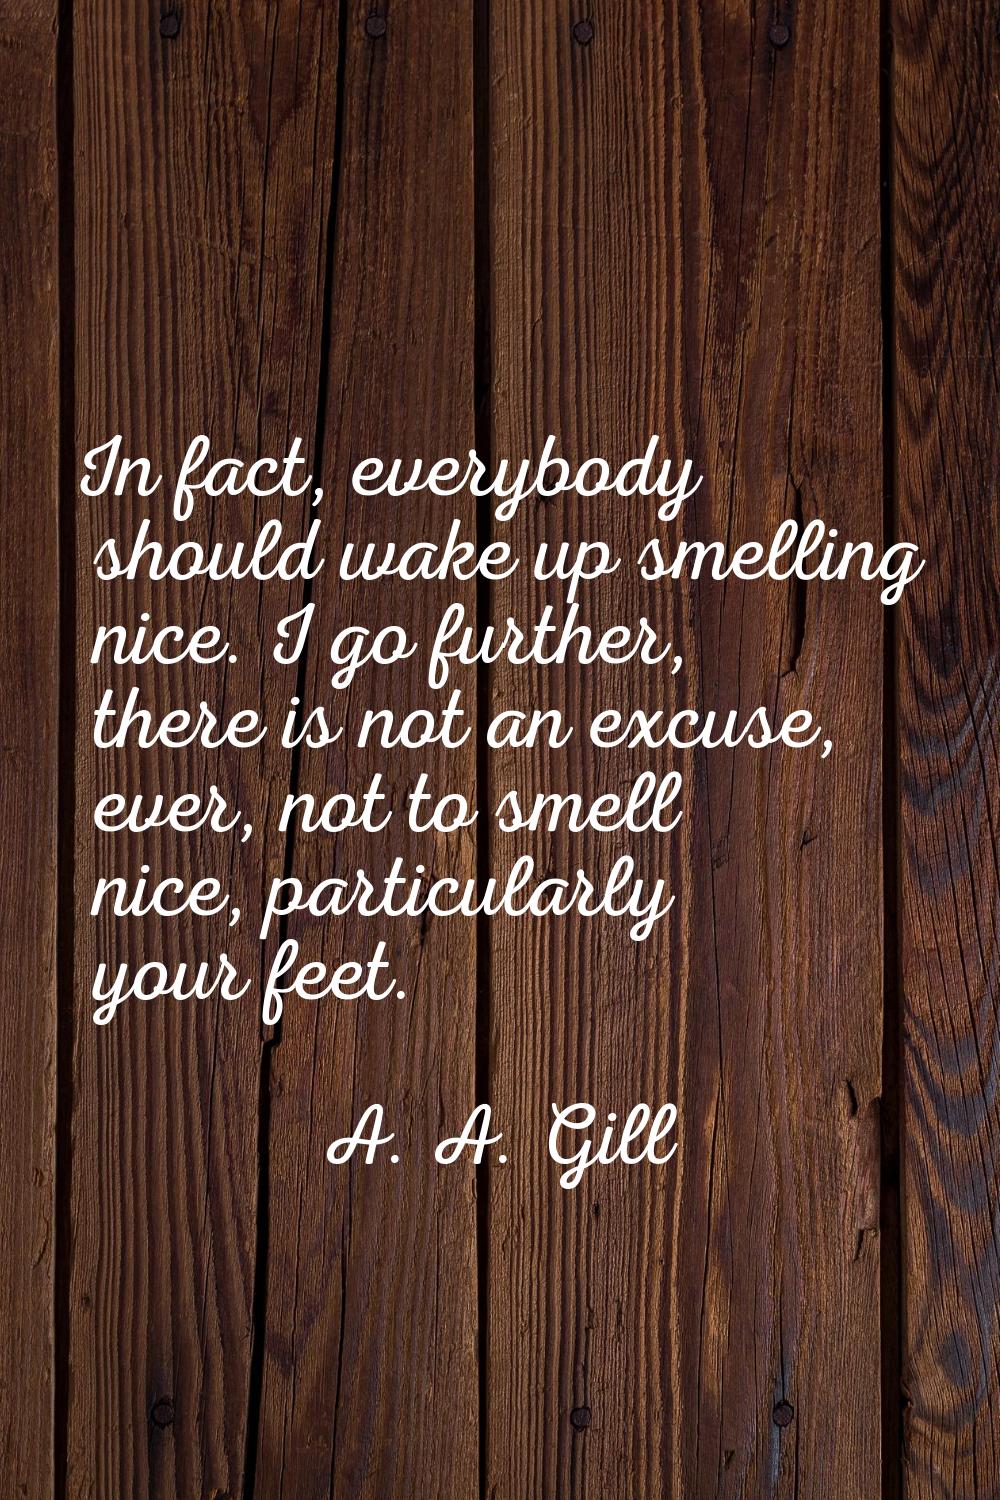 In fact, everybody should wake up smelling nice. I go further, there is not an excuse, ever, not to